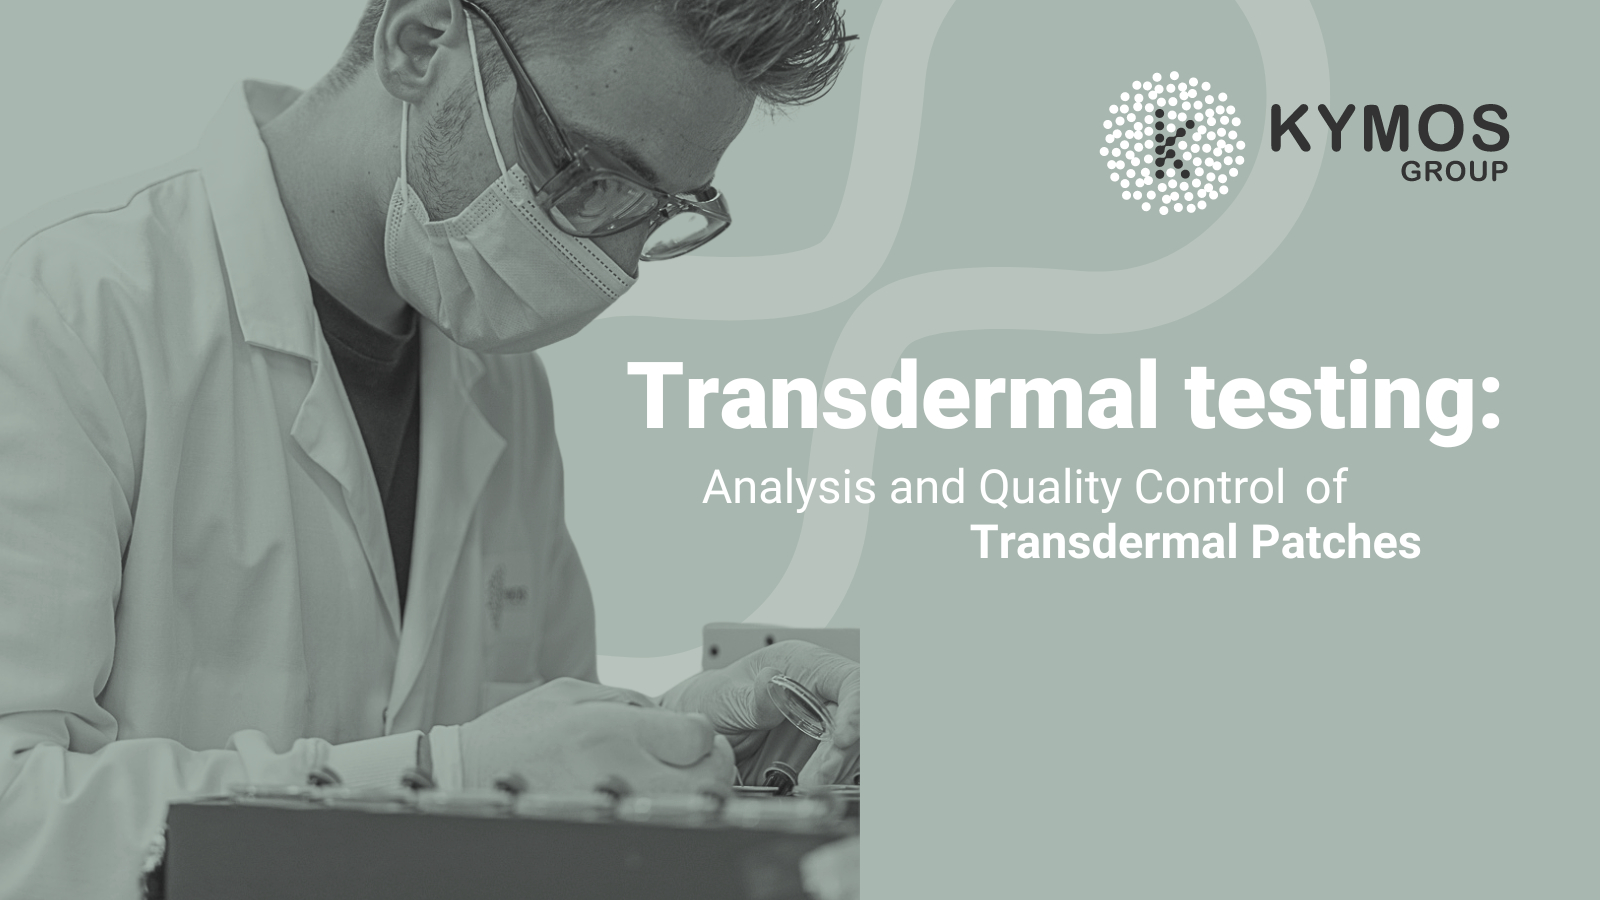 Image showing a scientist working in the transdermal testing article